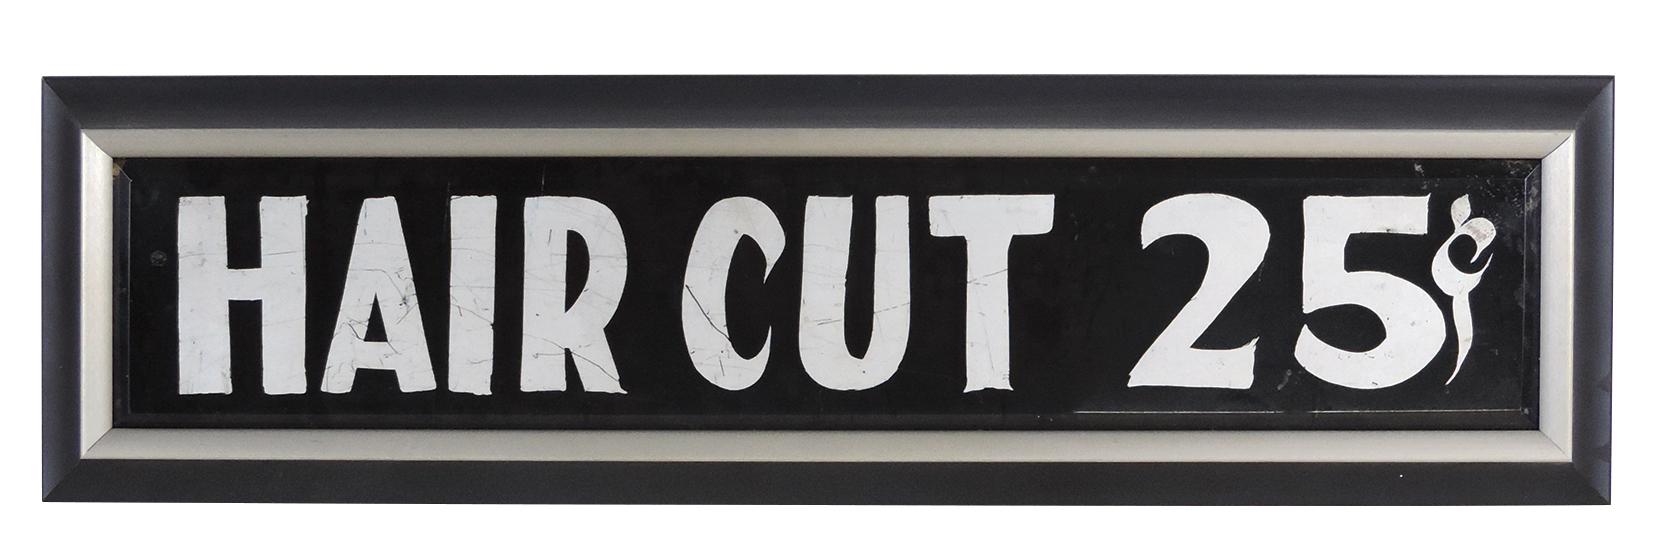 Barber Shop Sign, Hair Cut 25 Cents, painted beveled glass, VG cond in fram